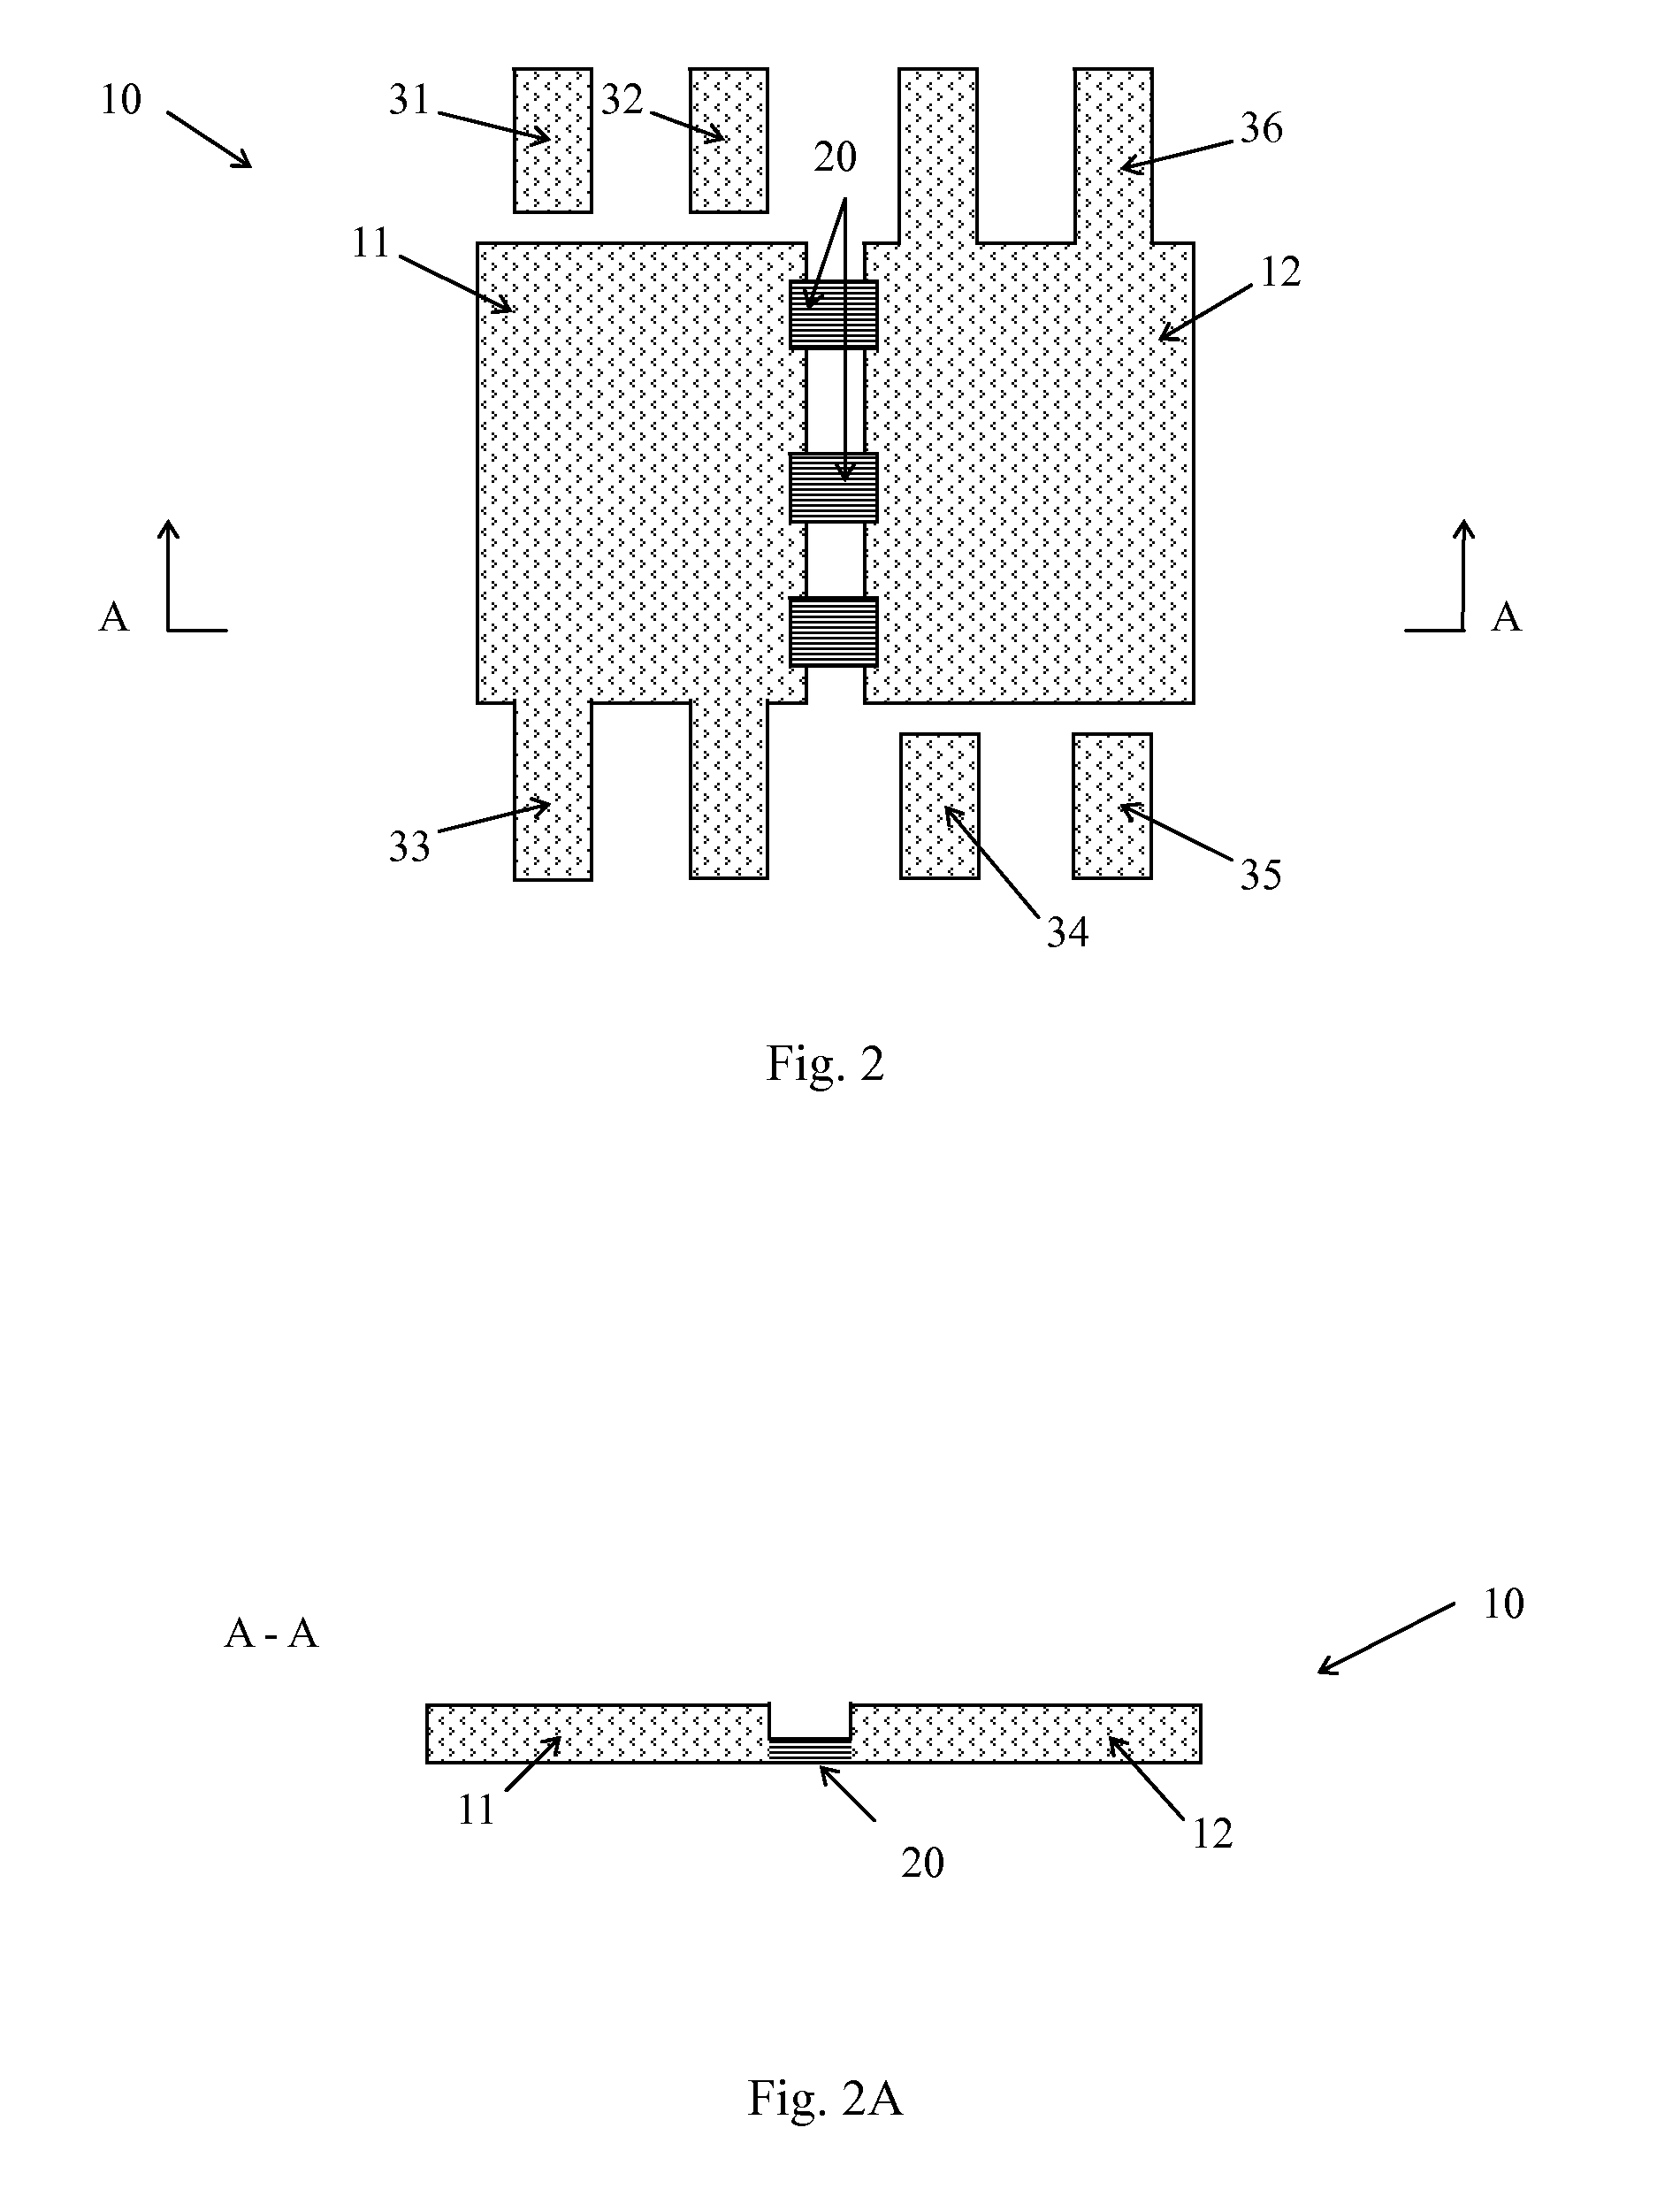 Method of making a copper wire bond package